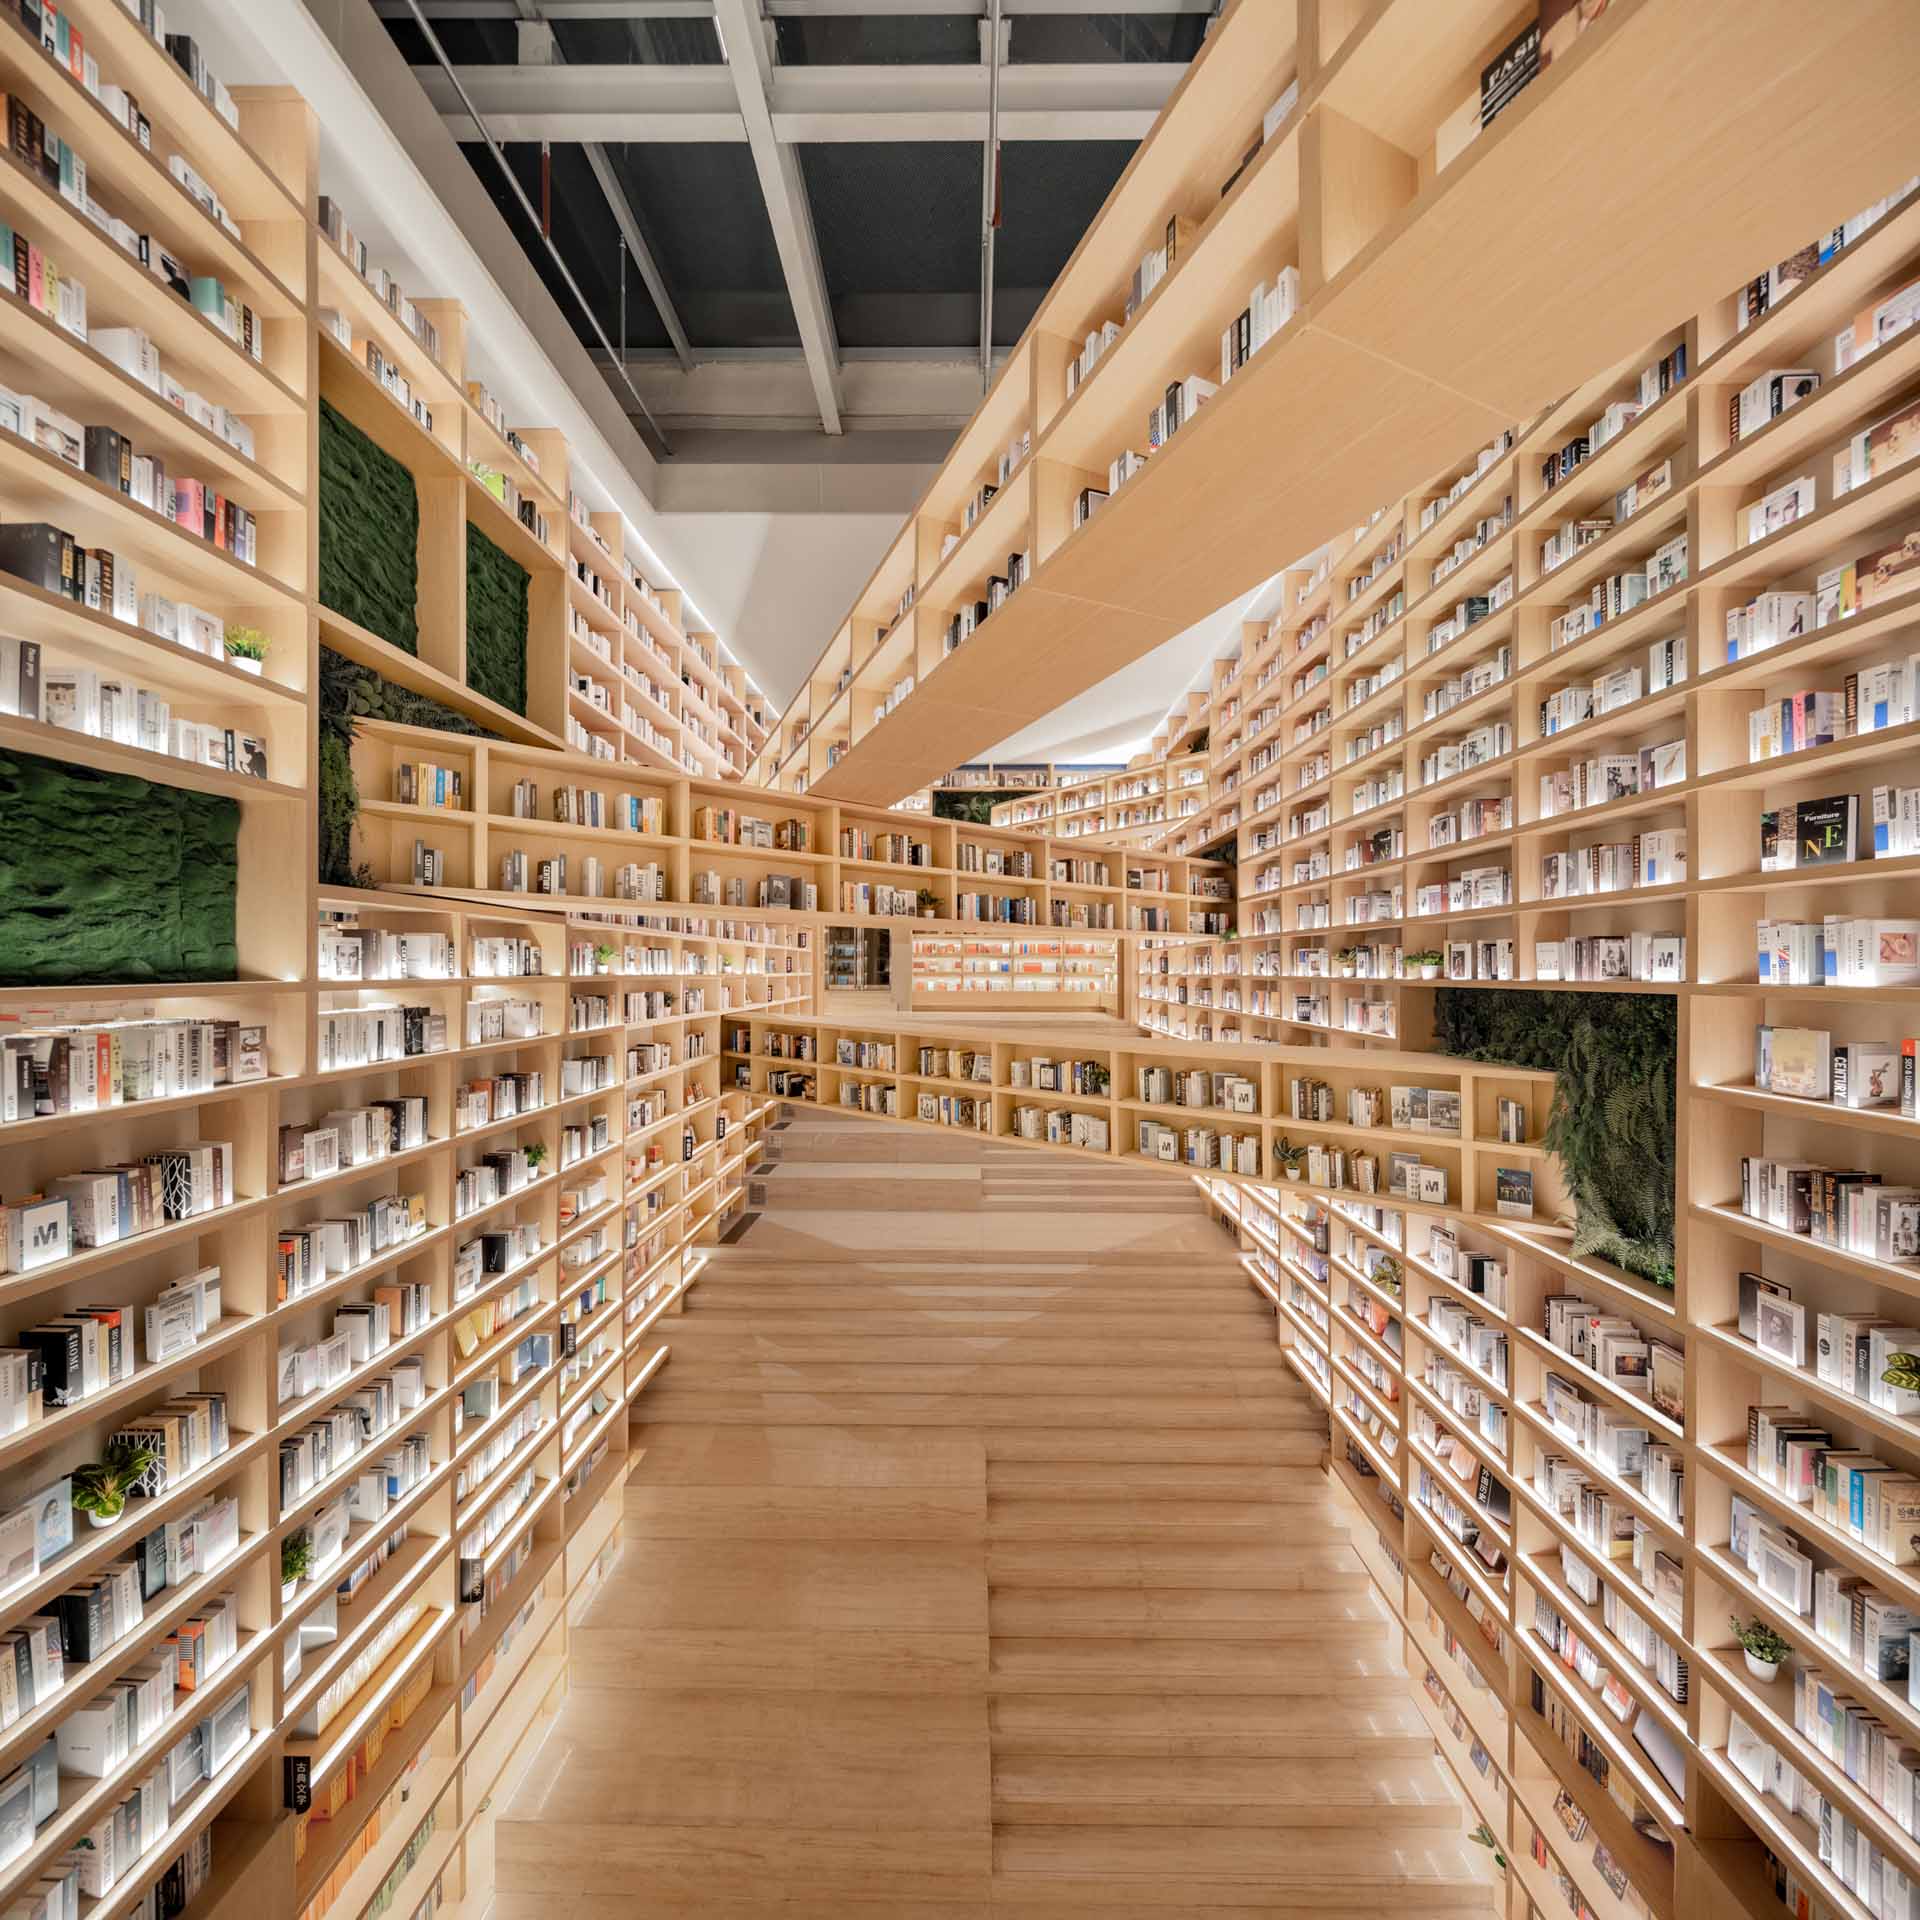 This bookshop has intersecting shelves in mid-air transcends, creating a space where diverse ideas, cultures, and perspectives meet and influence each other.